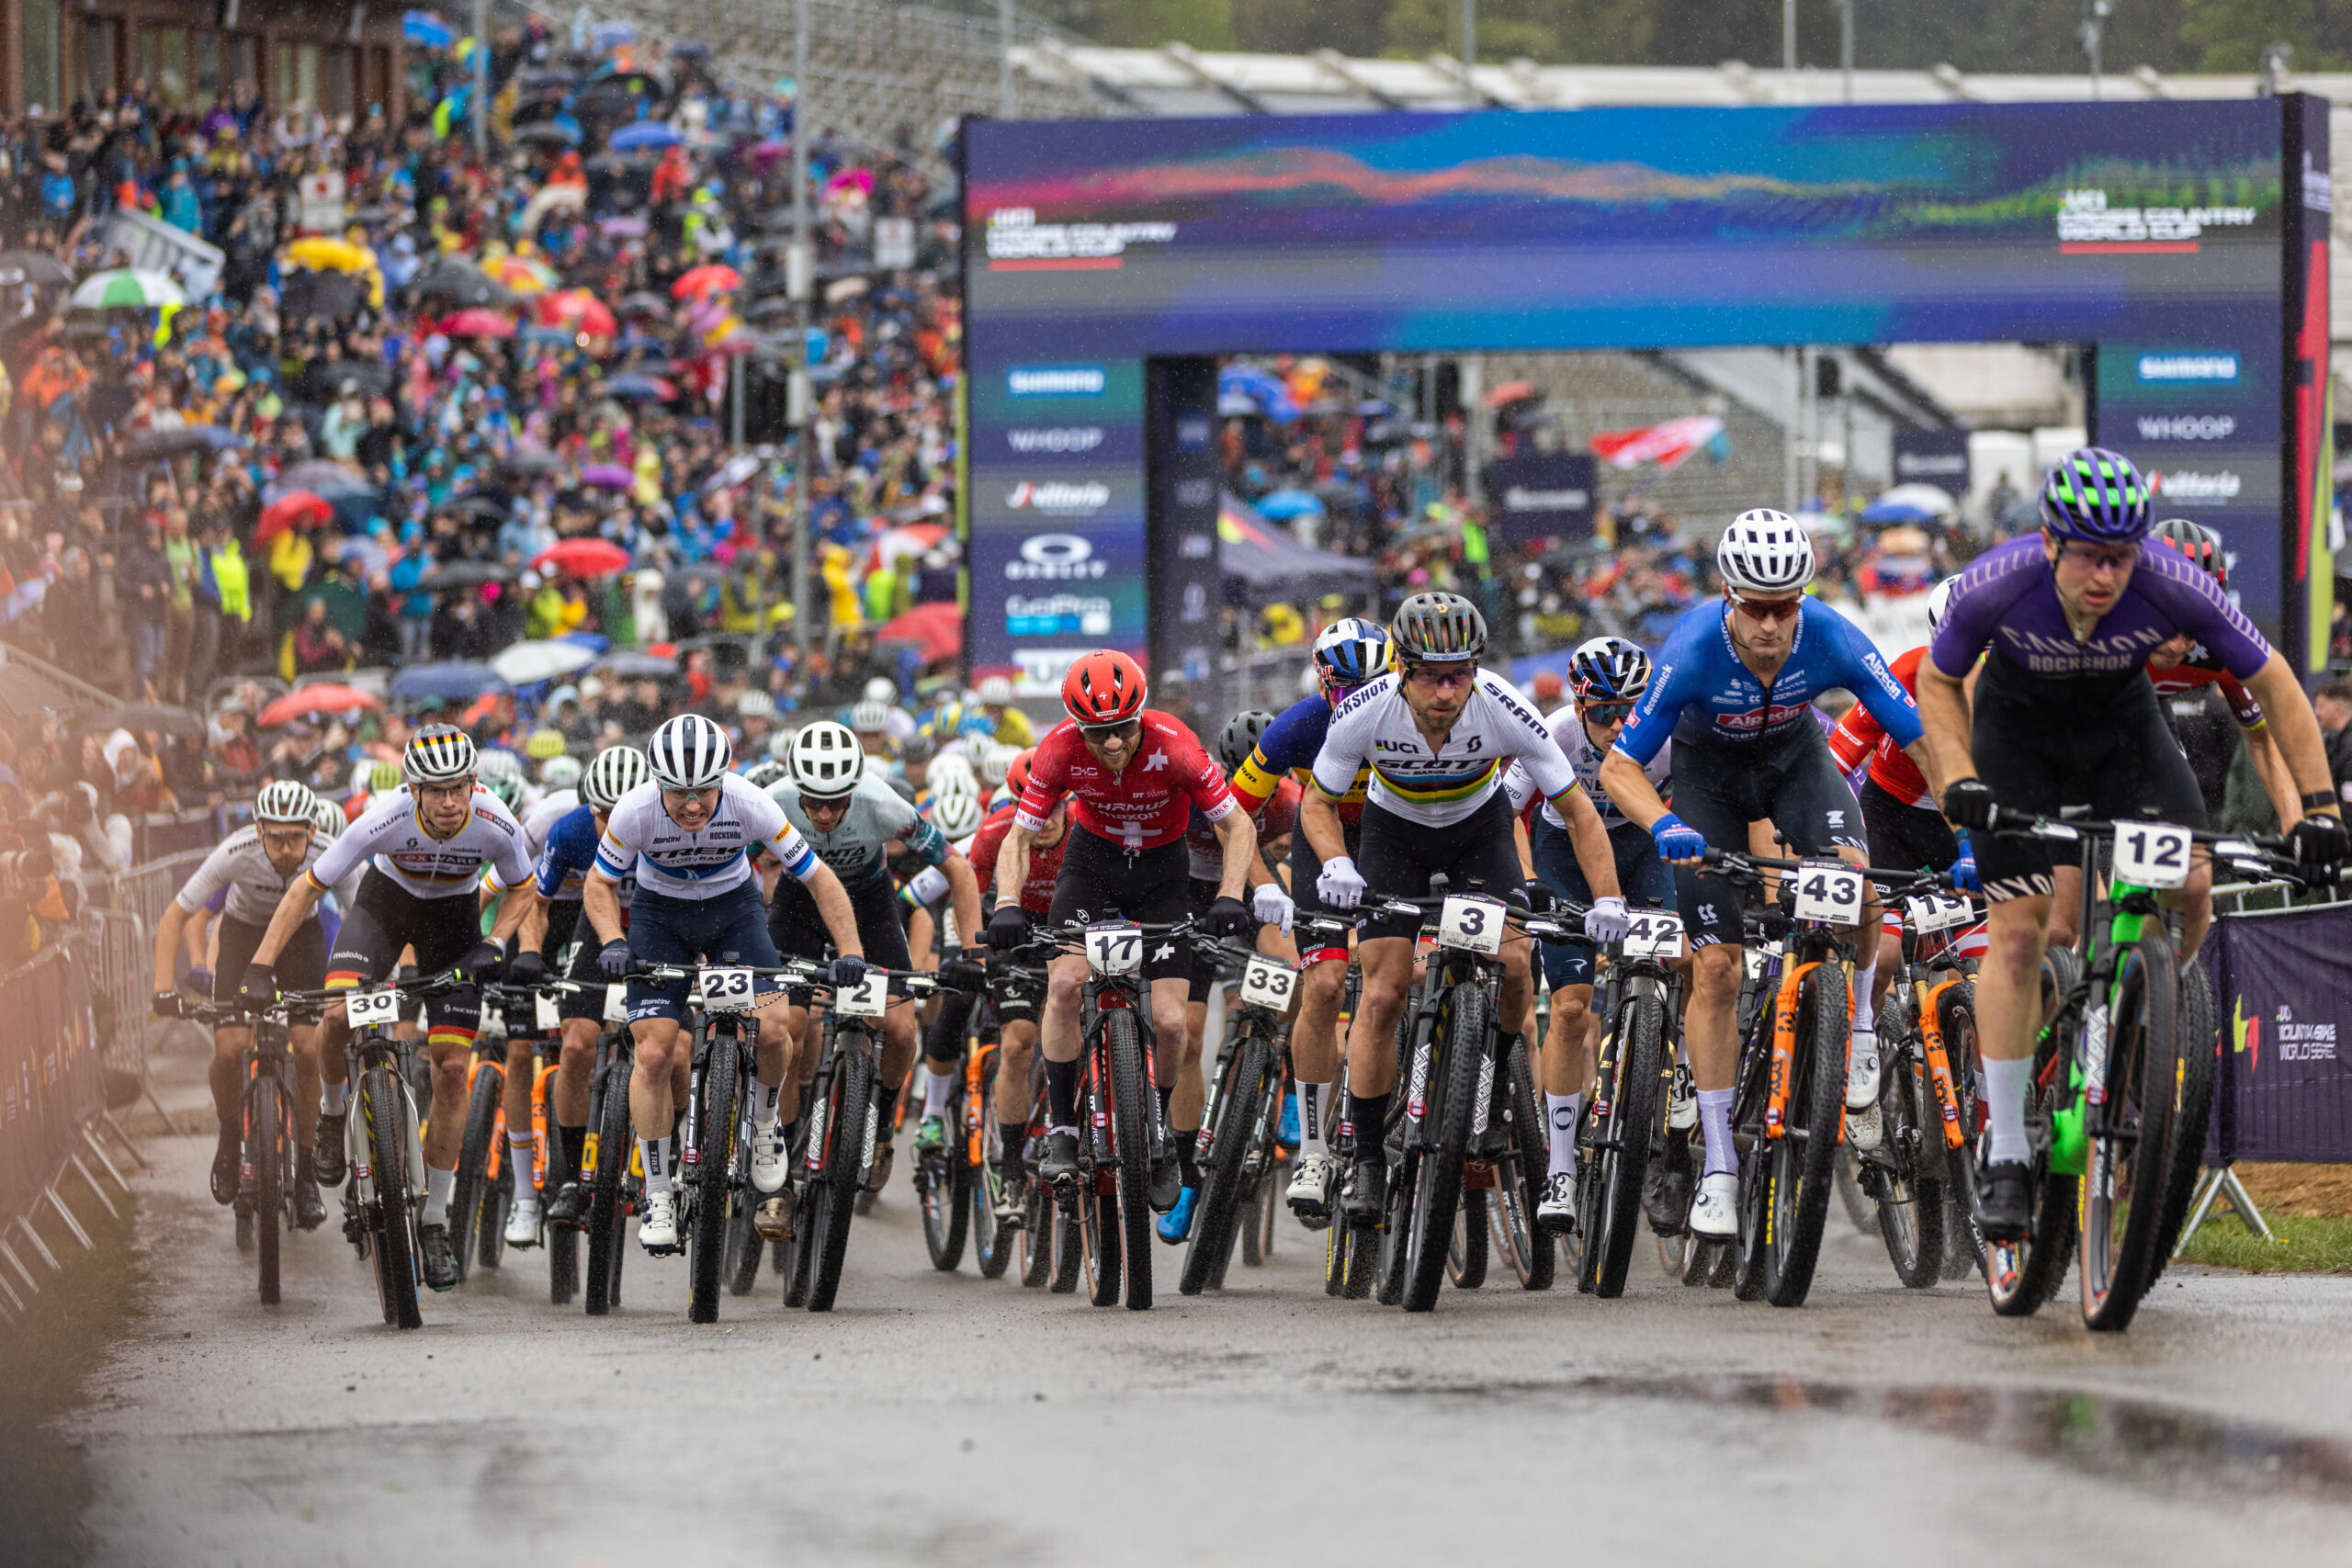 Crowded start group in Nove Mesto